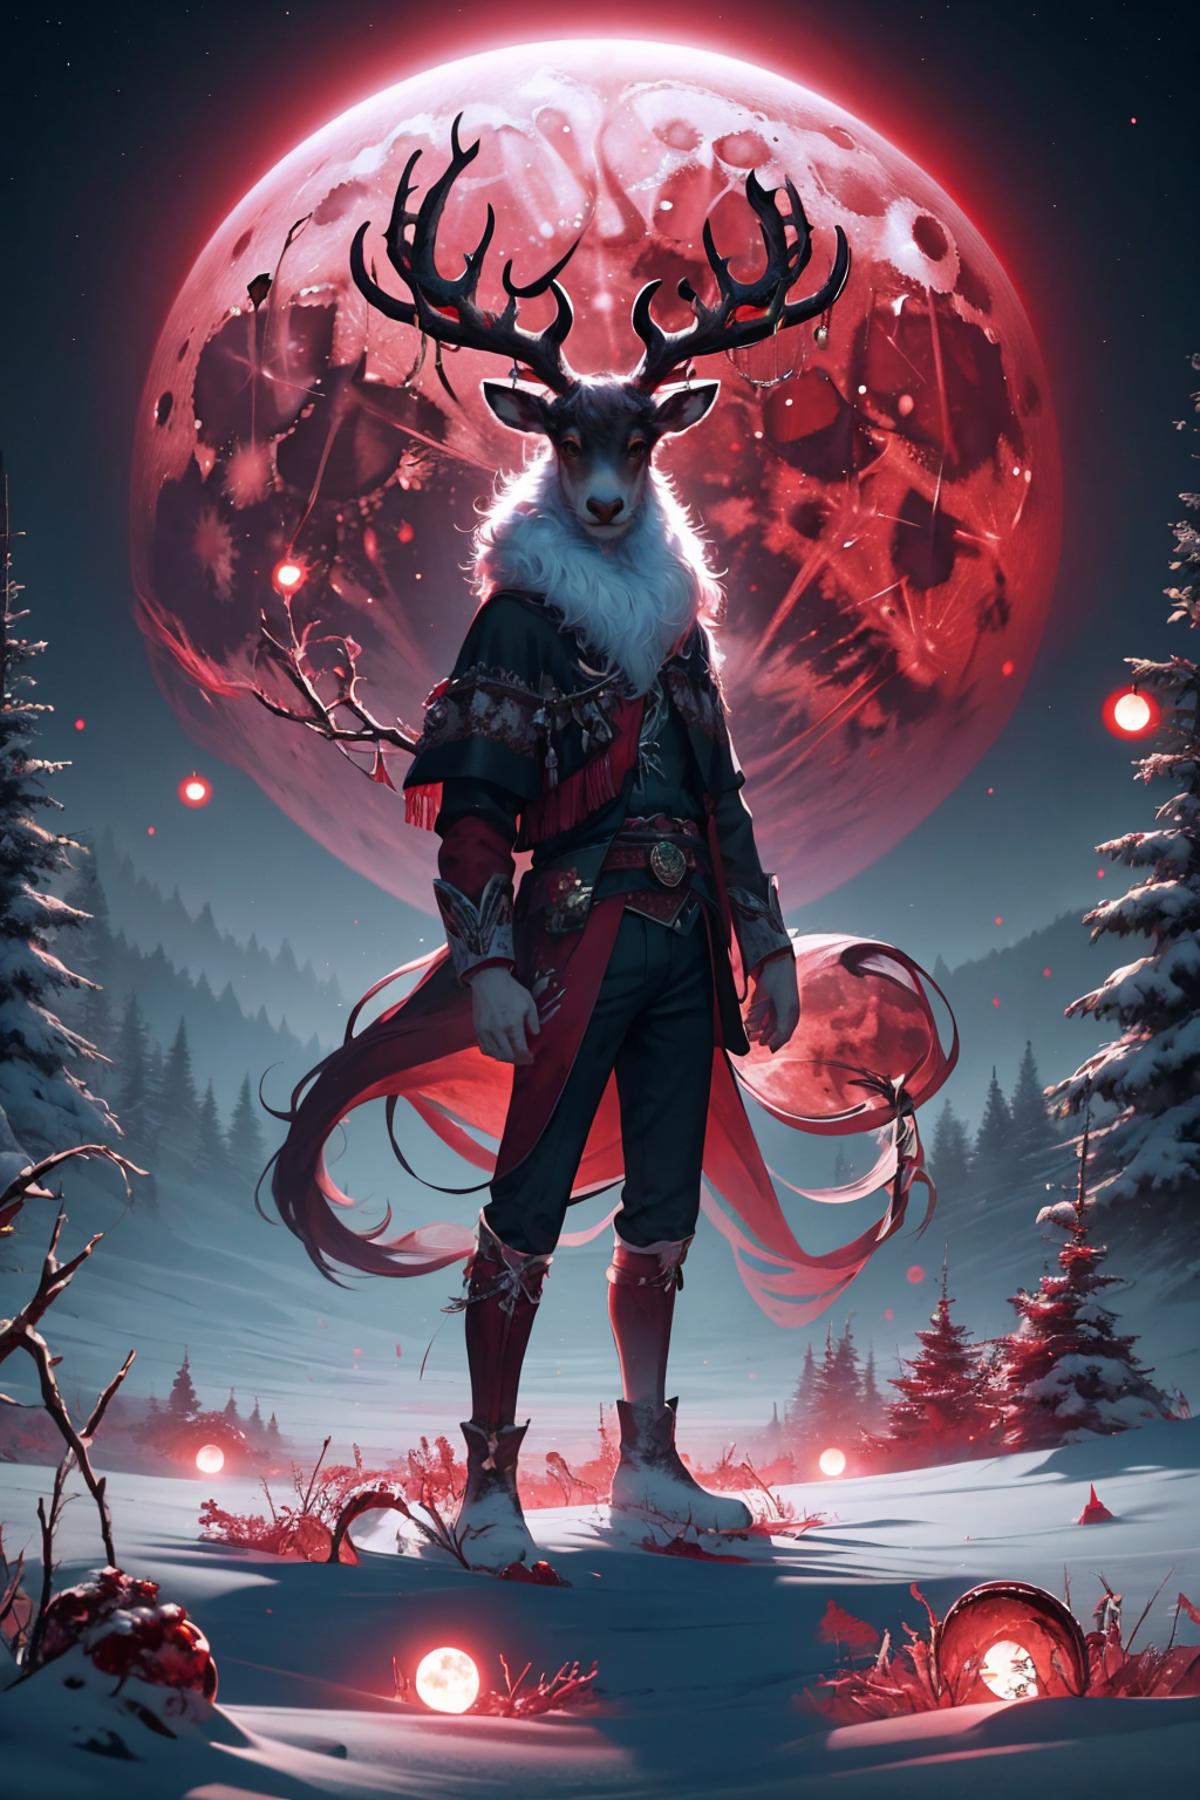 A magical and artistic image of a man with deer horns and antlers standing under a red moon with trees in the background.